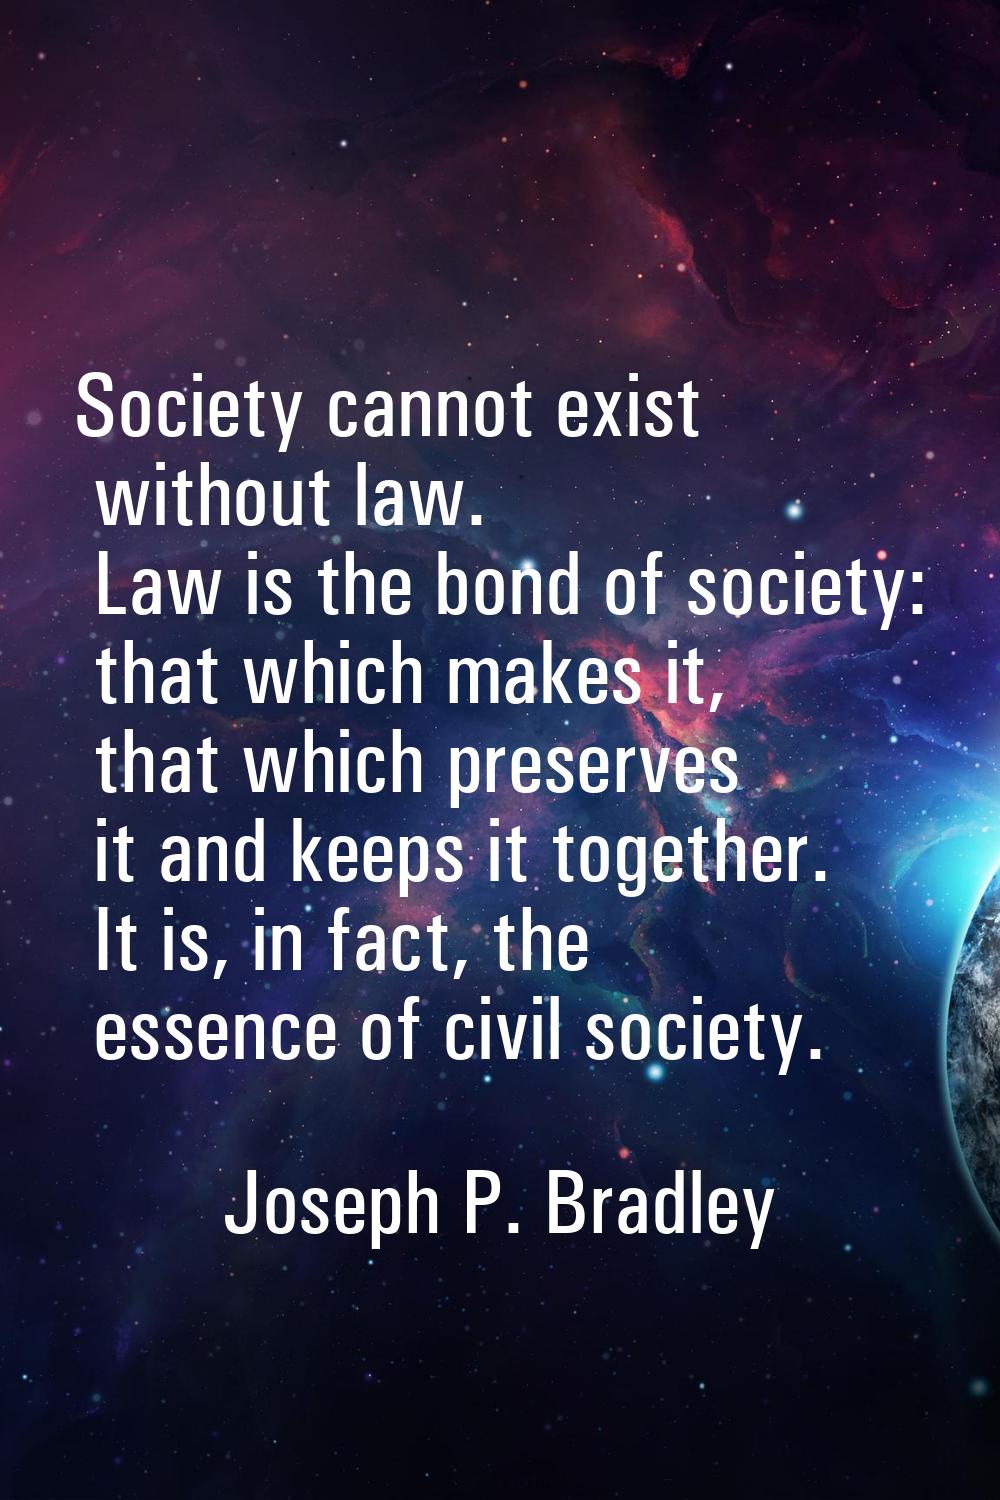 Society cannot exist without law. Law is the bond of society: that which makes it, that which prese